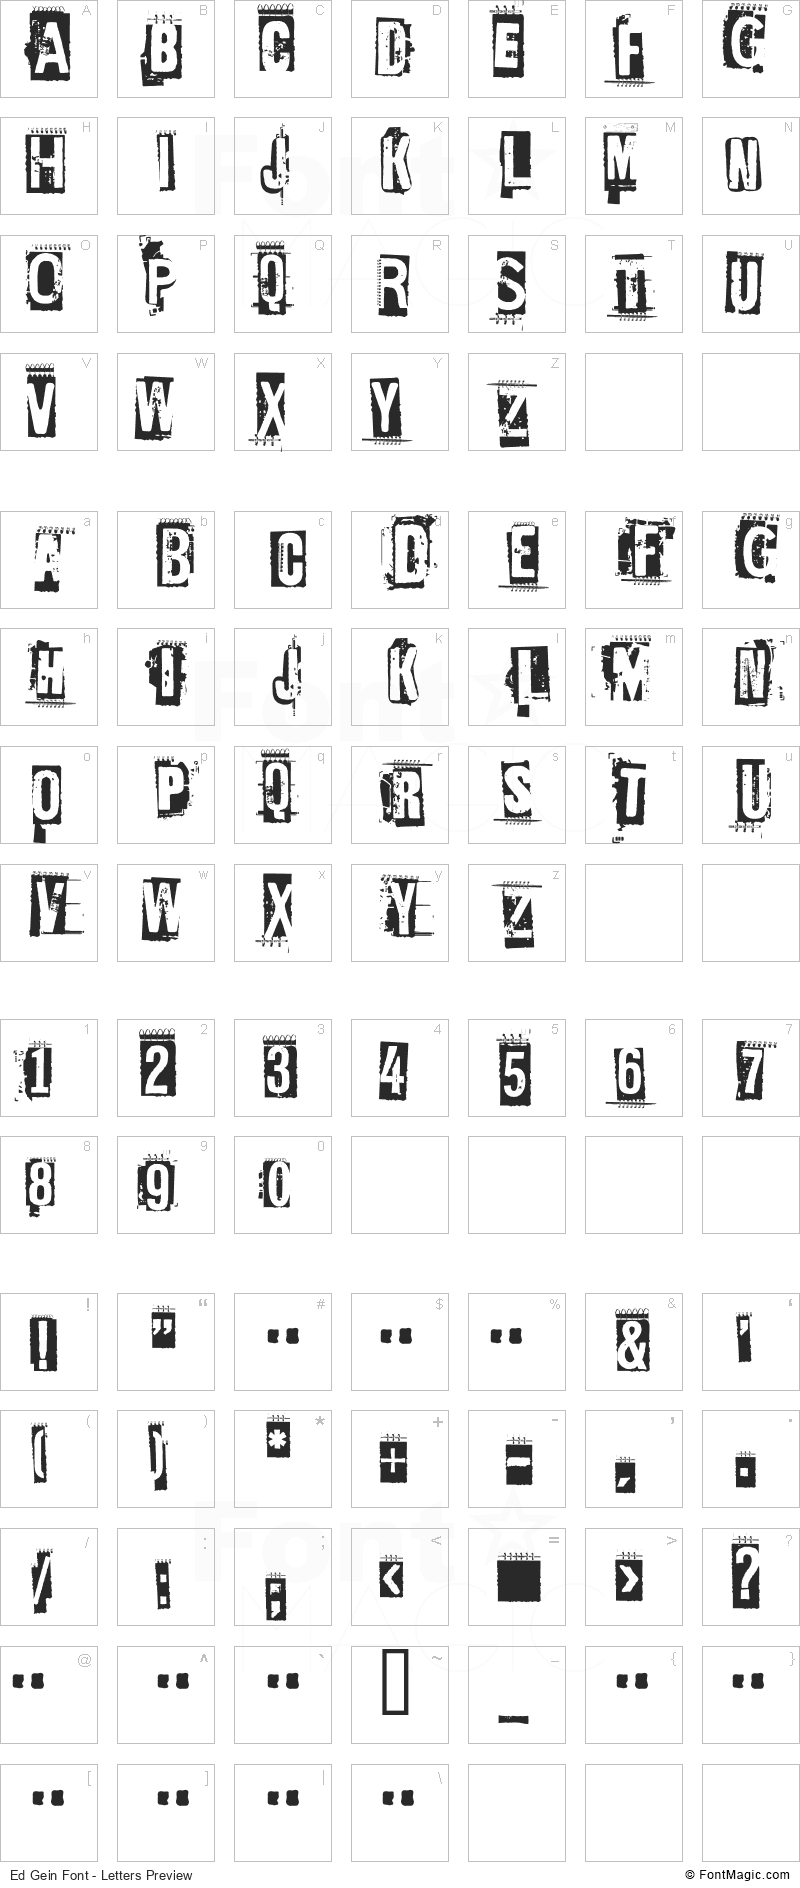 Ed Gein Font - All Latters Preview Chart